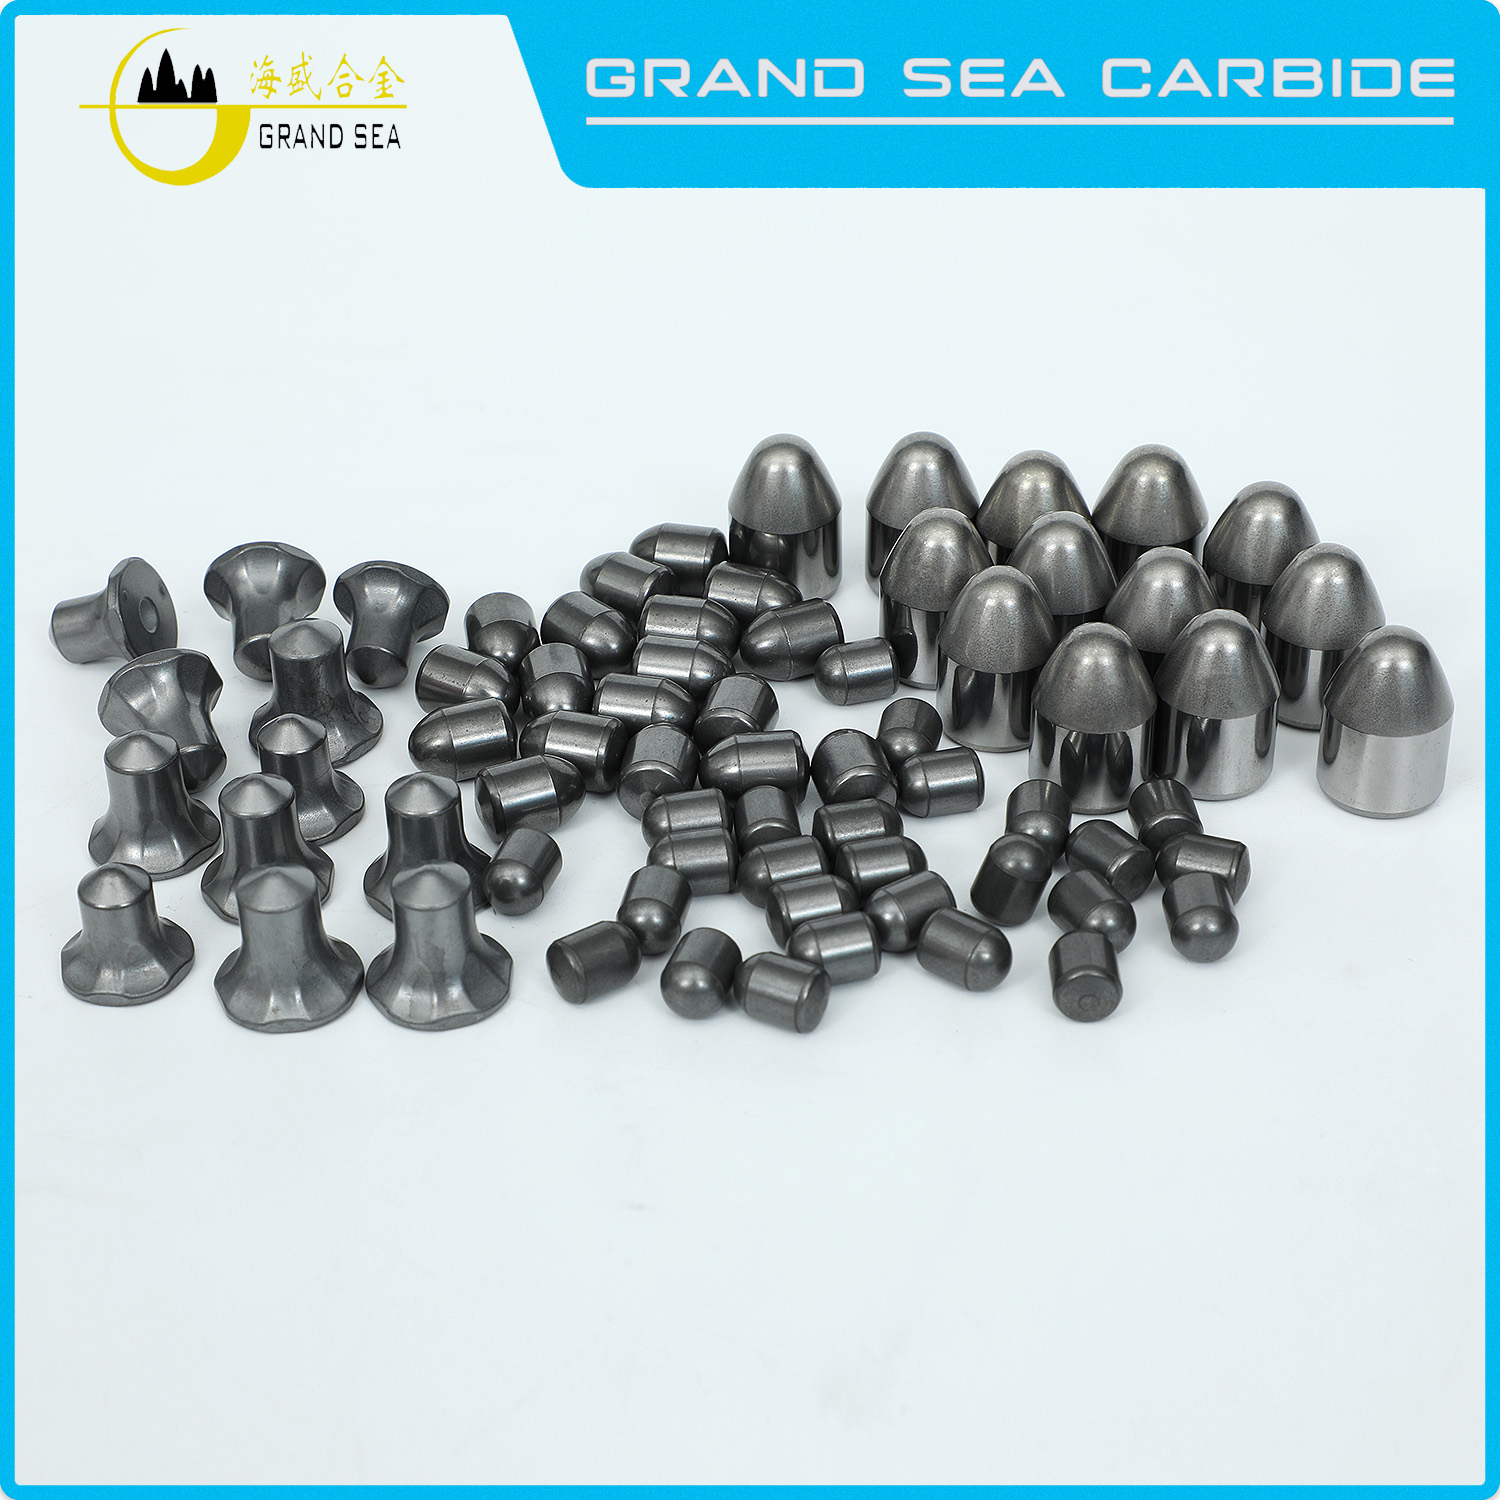 Tungsten carbide brazed on steel cutters for the mining and drilling industries